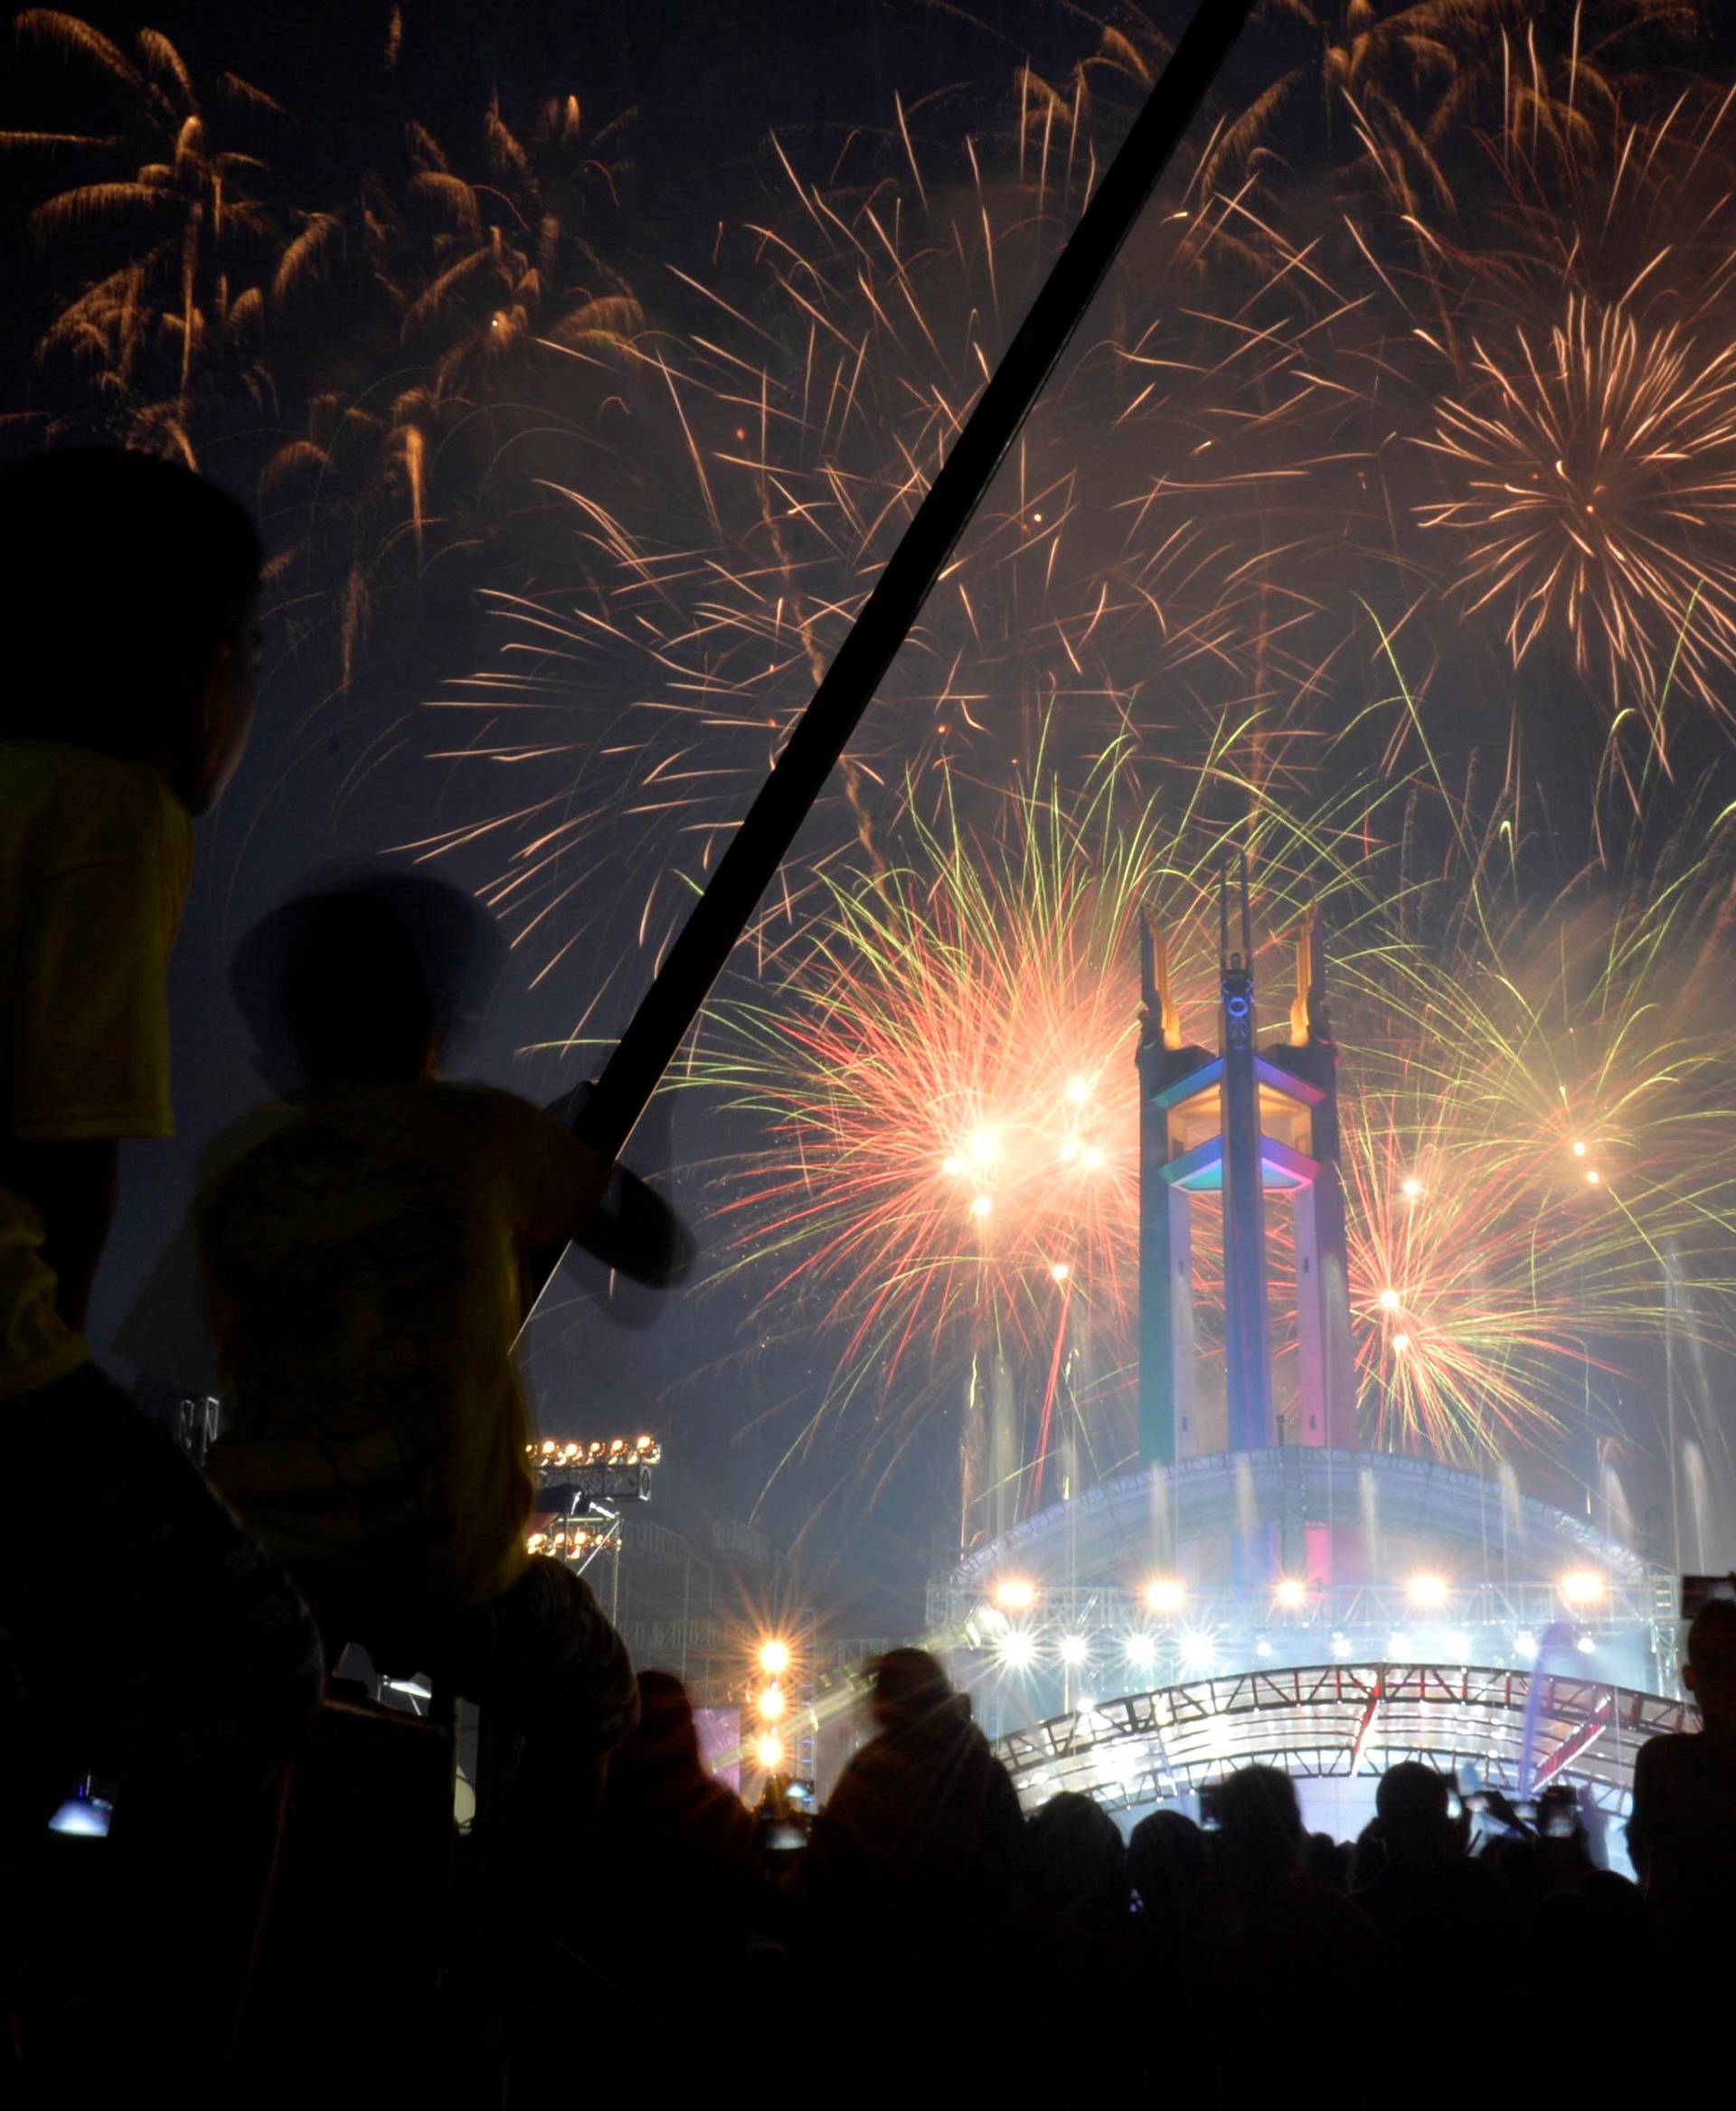 Revellers watch as fireworks explode over the Quezon Memorial Circle during New Year's celebrations in Quezon City, Metro Manila